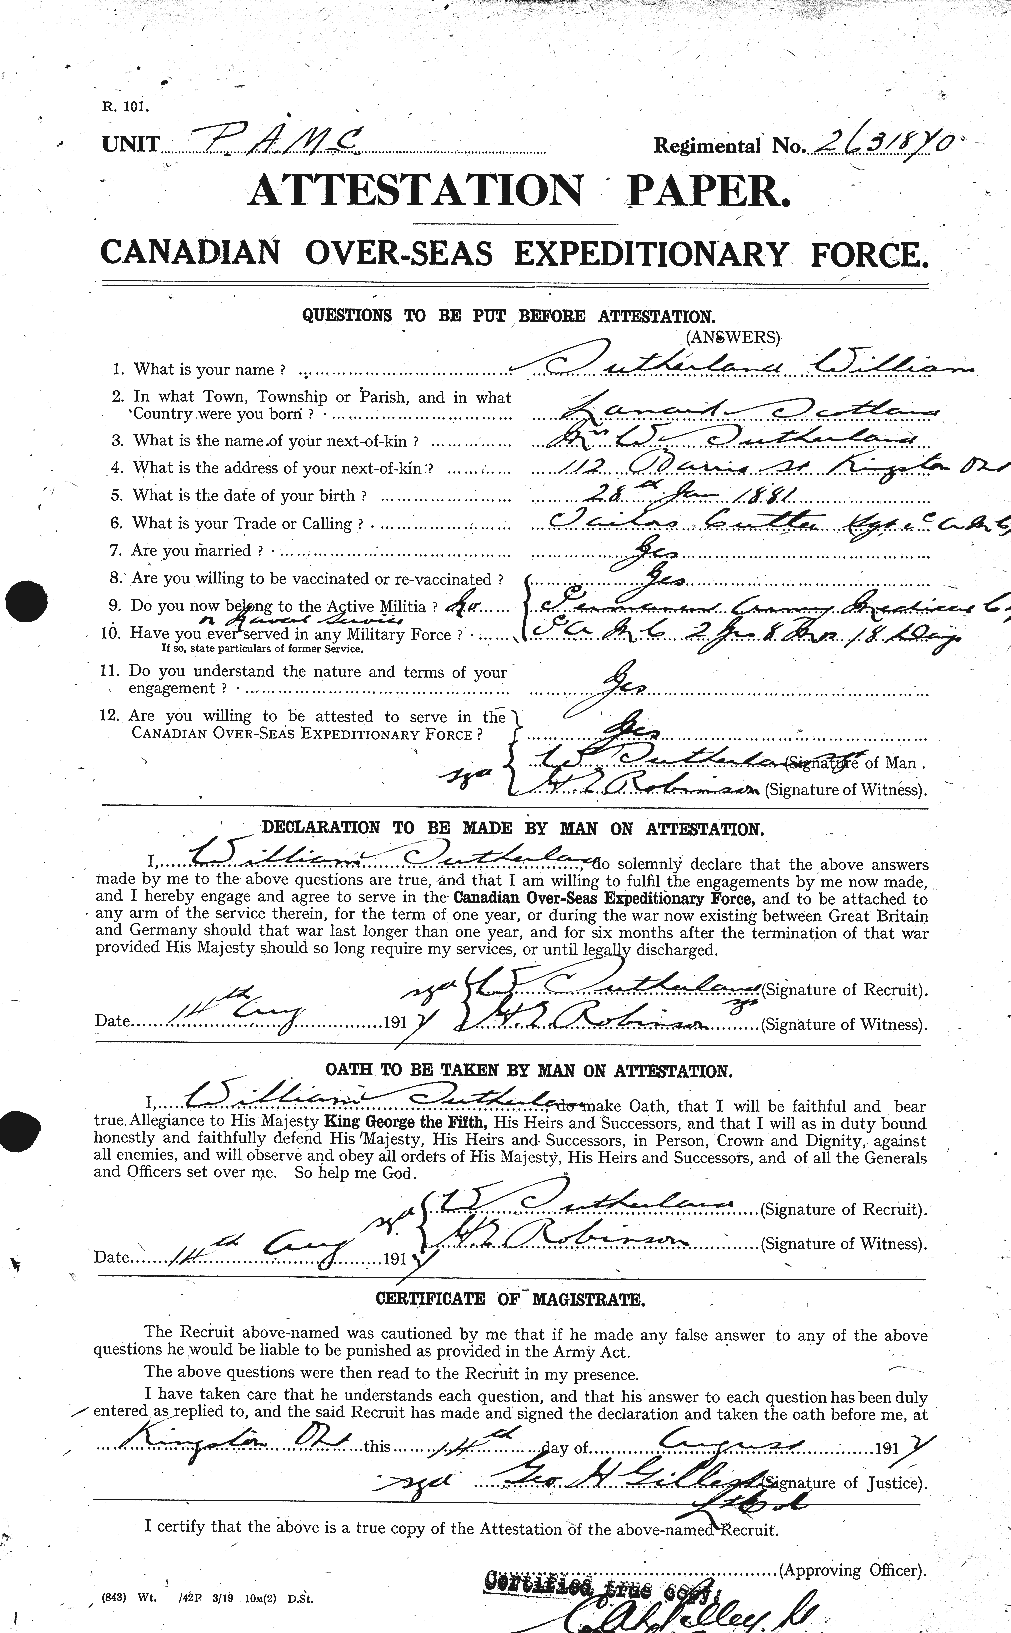 Personnel Records of the First World War - CEF 126454a